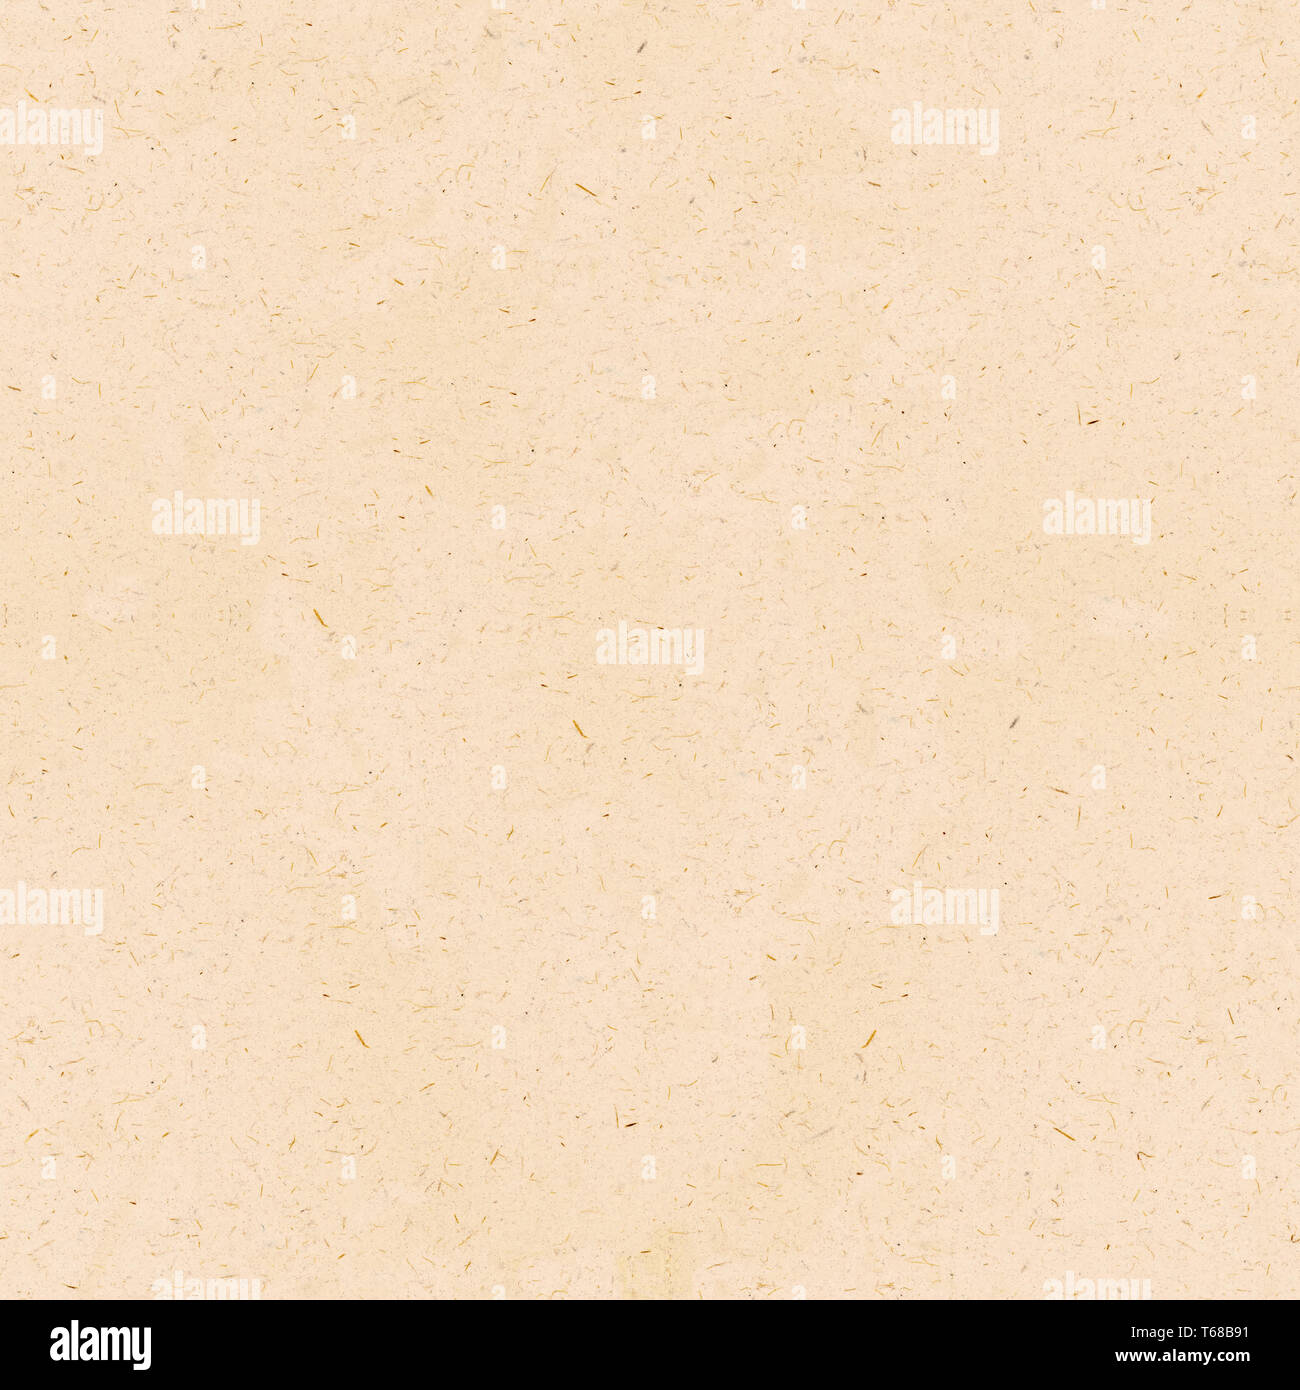 Recycled Paper Seamless Background Stock Photo